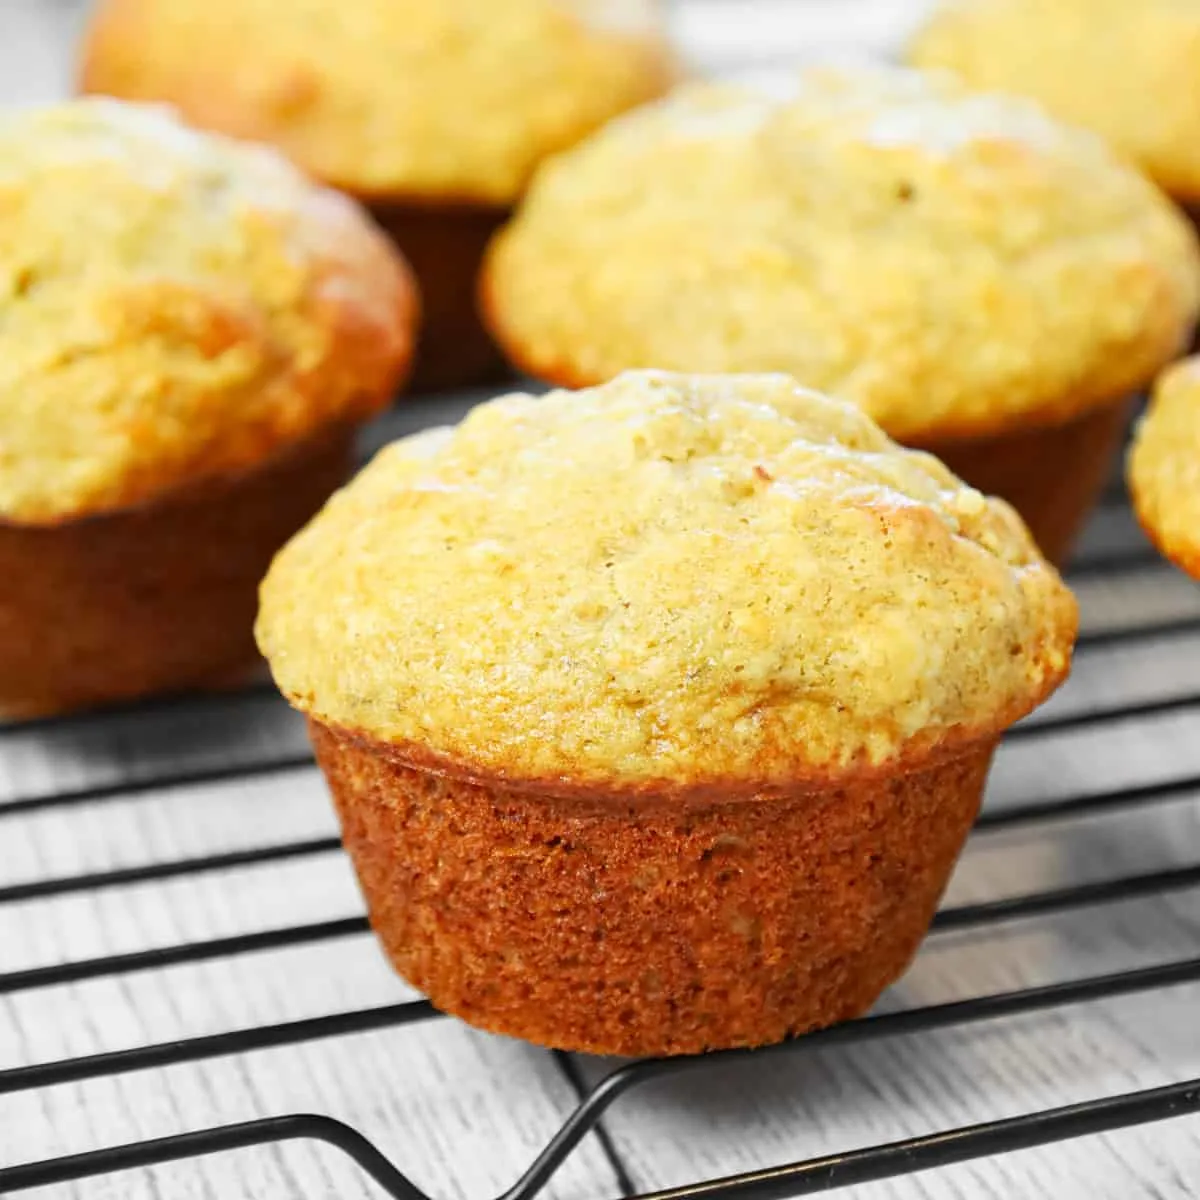 Banana Nut Muffins are delicious homemade banana muffins loaded with chopped walnuts.